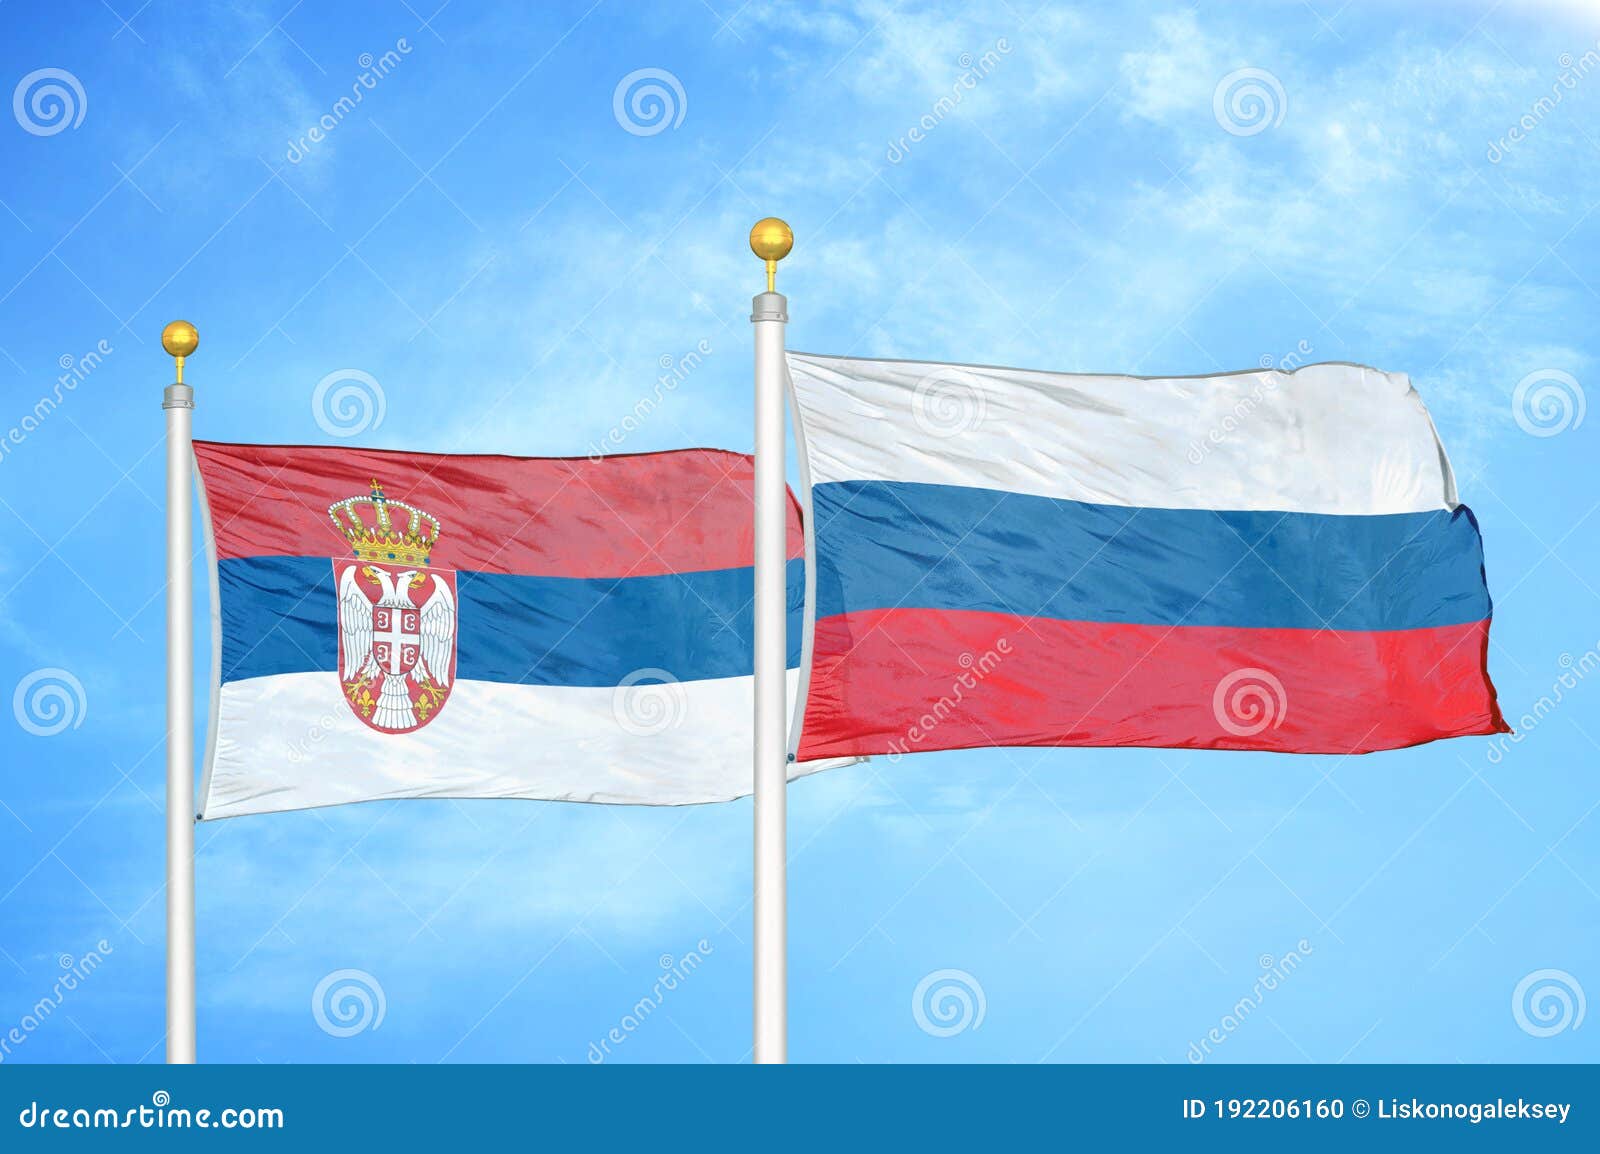 serbia and russia two flags on flagpoles and blue sky